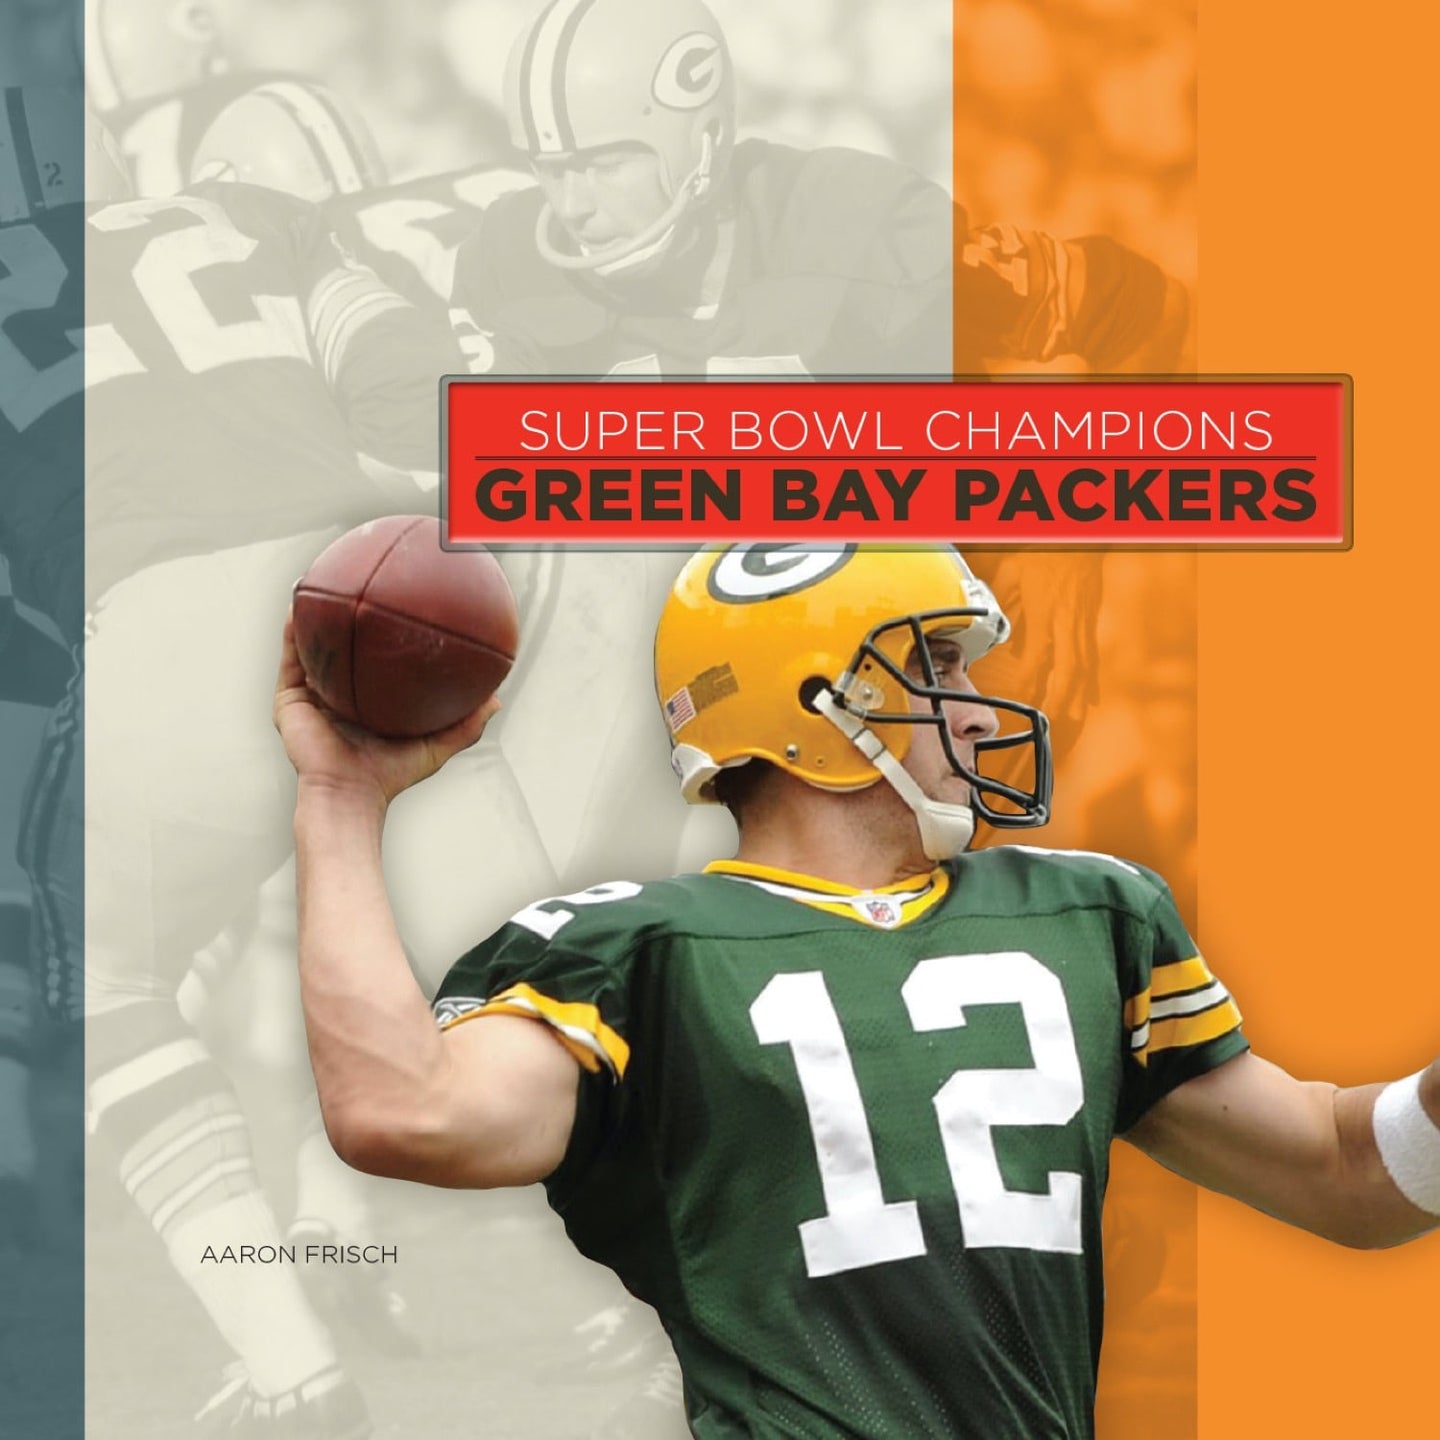 Super Bowl-Champions: Green Bay Packers (2014)